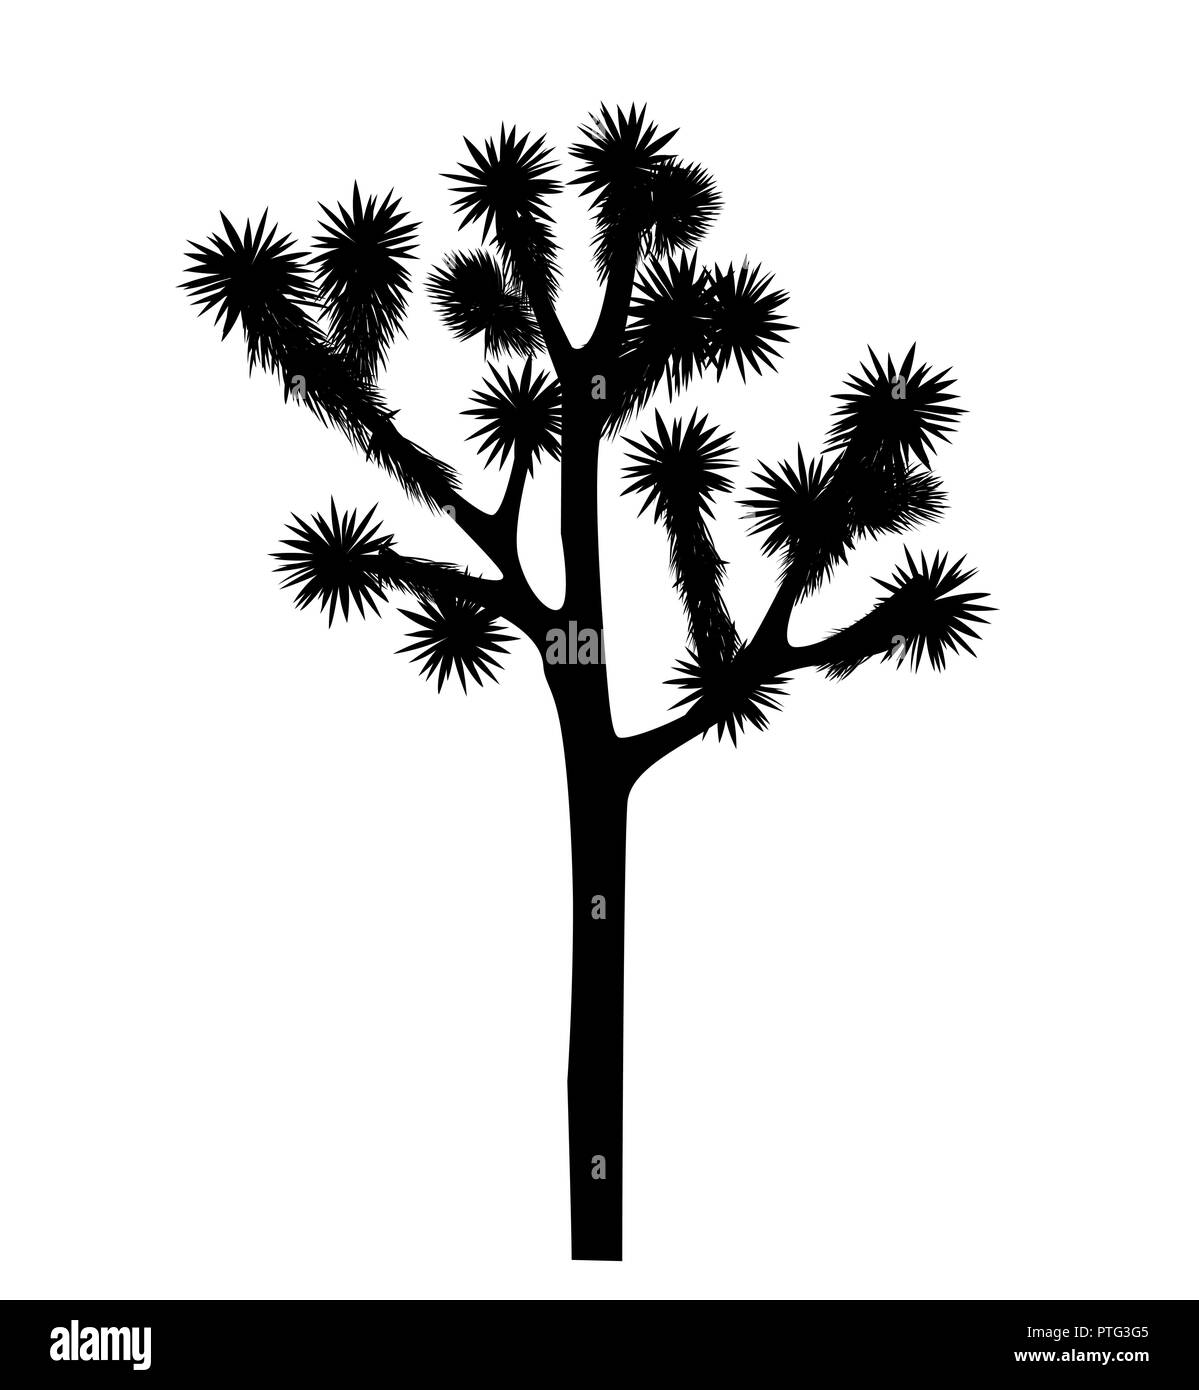 Joshua tree vector isolated on white background. Desigh element with Yucca brevifolia black silhouette. Stock Vector